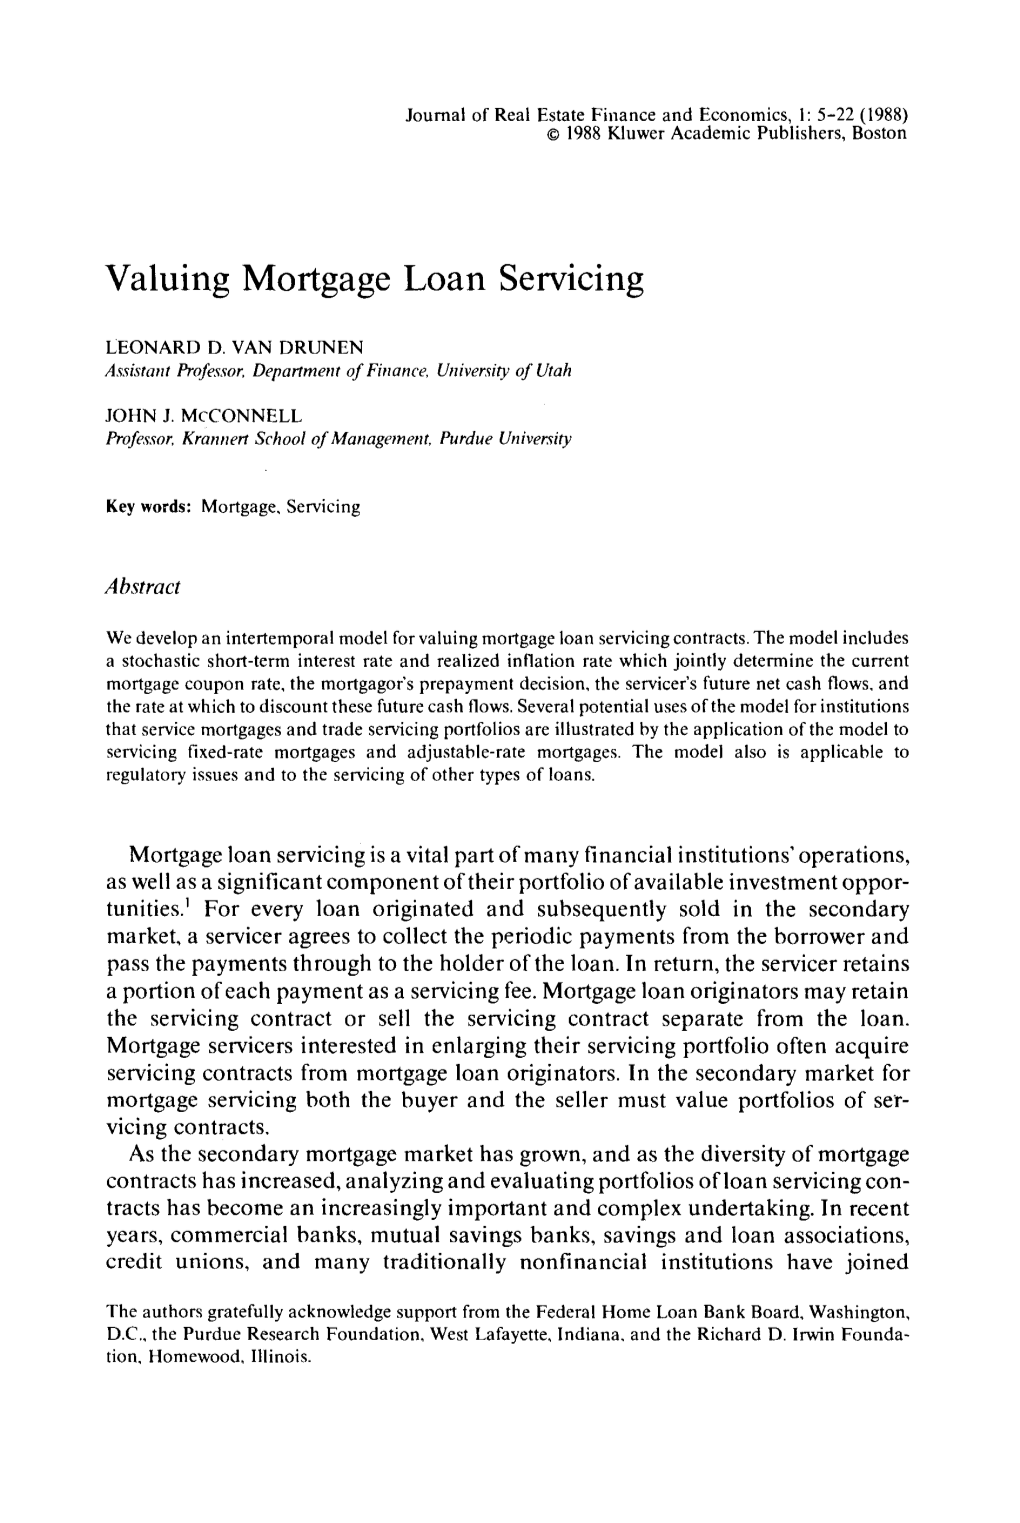 Valuing Mortgage Loan Servicing